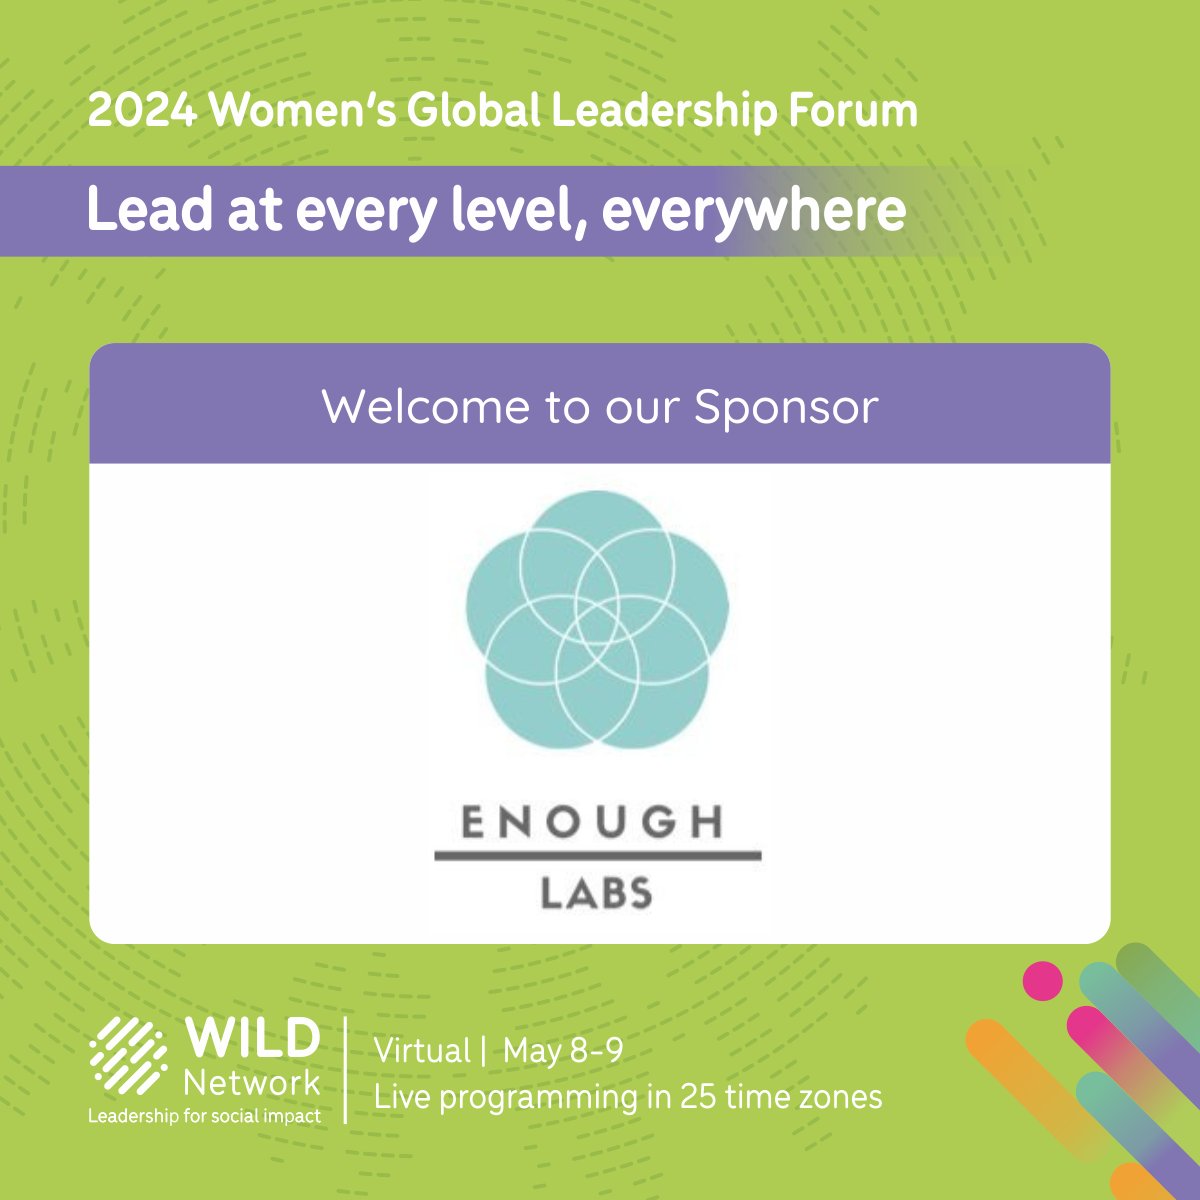 We look forward to welcoming a company-wide delegation from @EnoughLabs to the virtual 2024 Women’s Global Leadership Forum.

thewildnetwork.org/forum/partners/

#WILDLeaders #GenerationNow #InternationalDevelopment